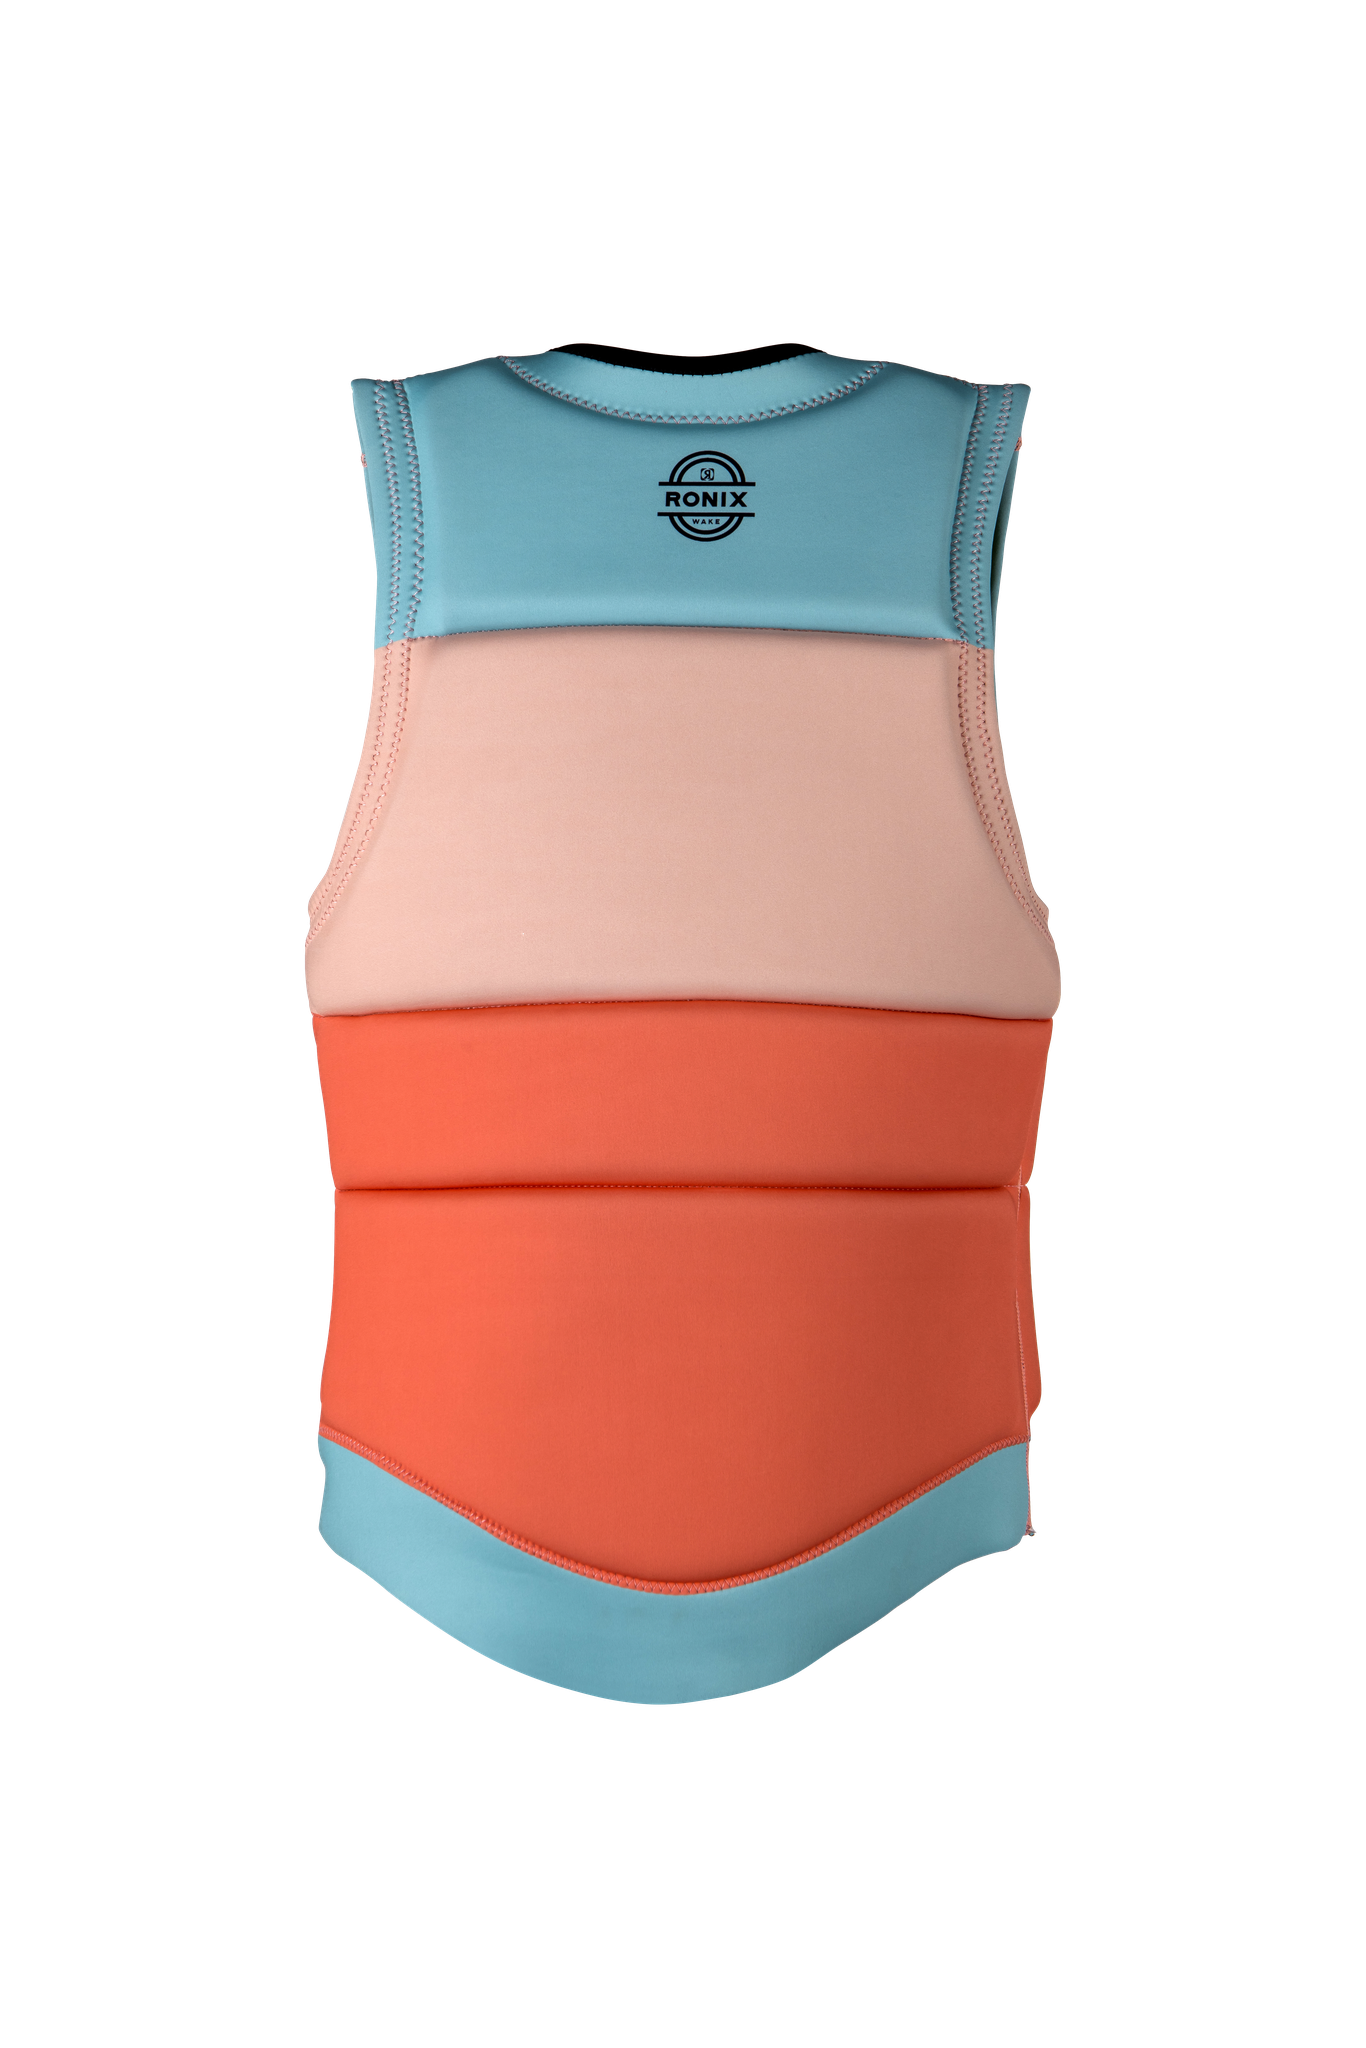 A Ronix 2023 Coral Women's CE Impact Vest in pink, orange and blue that is CE approved.